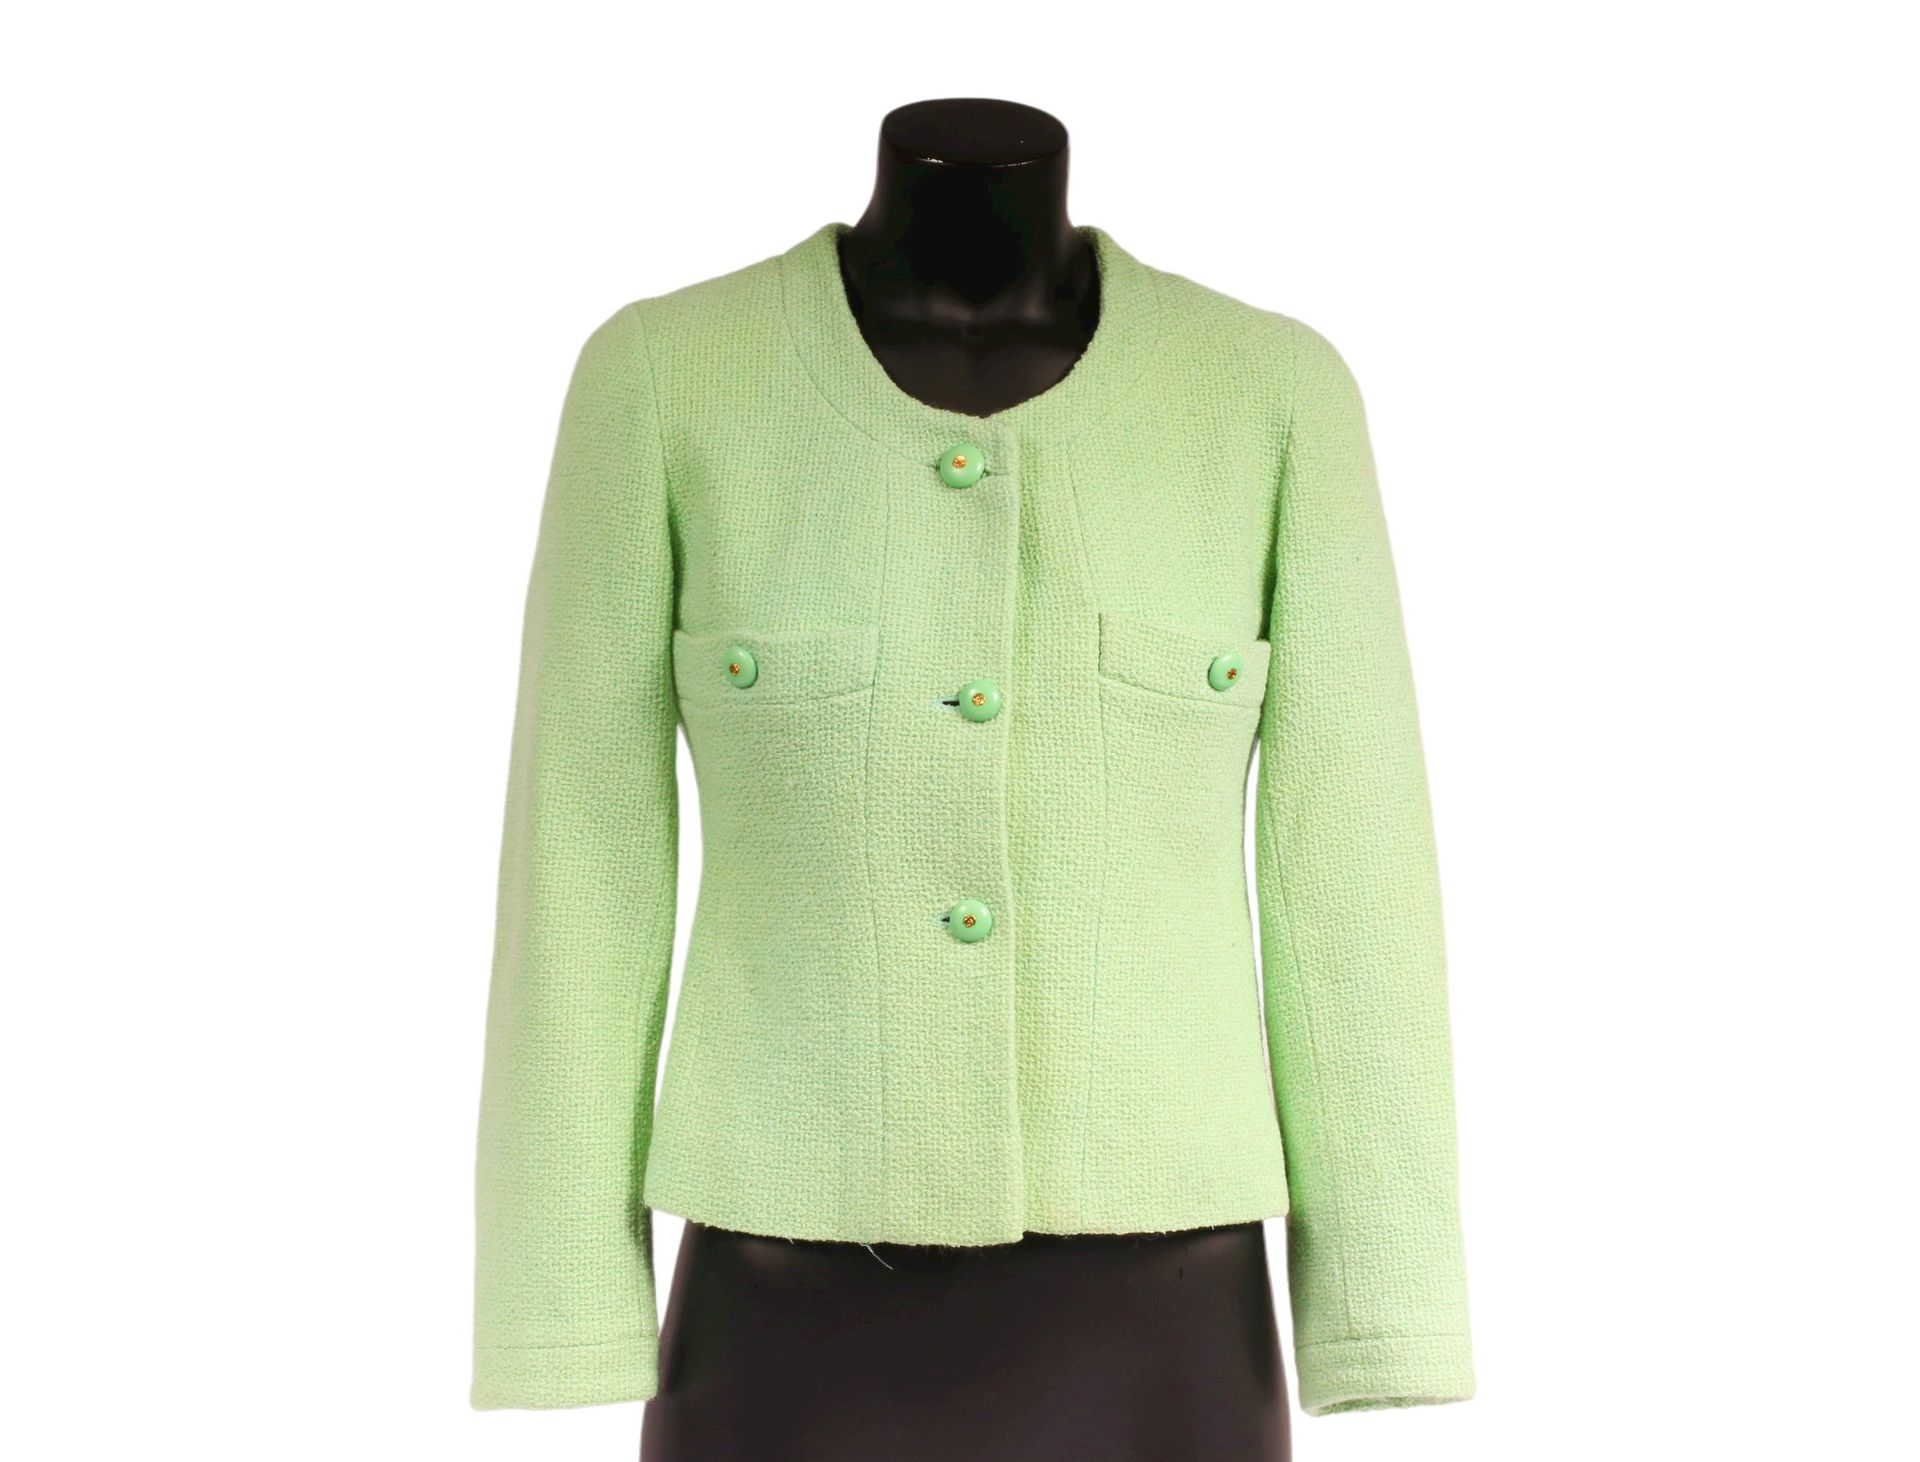 Null * CHANEL BOUTIQUE

Circa 1990 - 1995

Short jacket in almond green tweed 

&hellip;